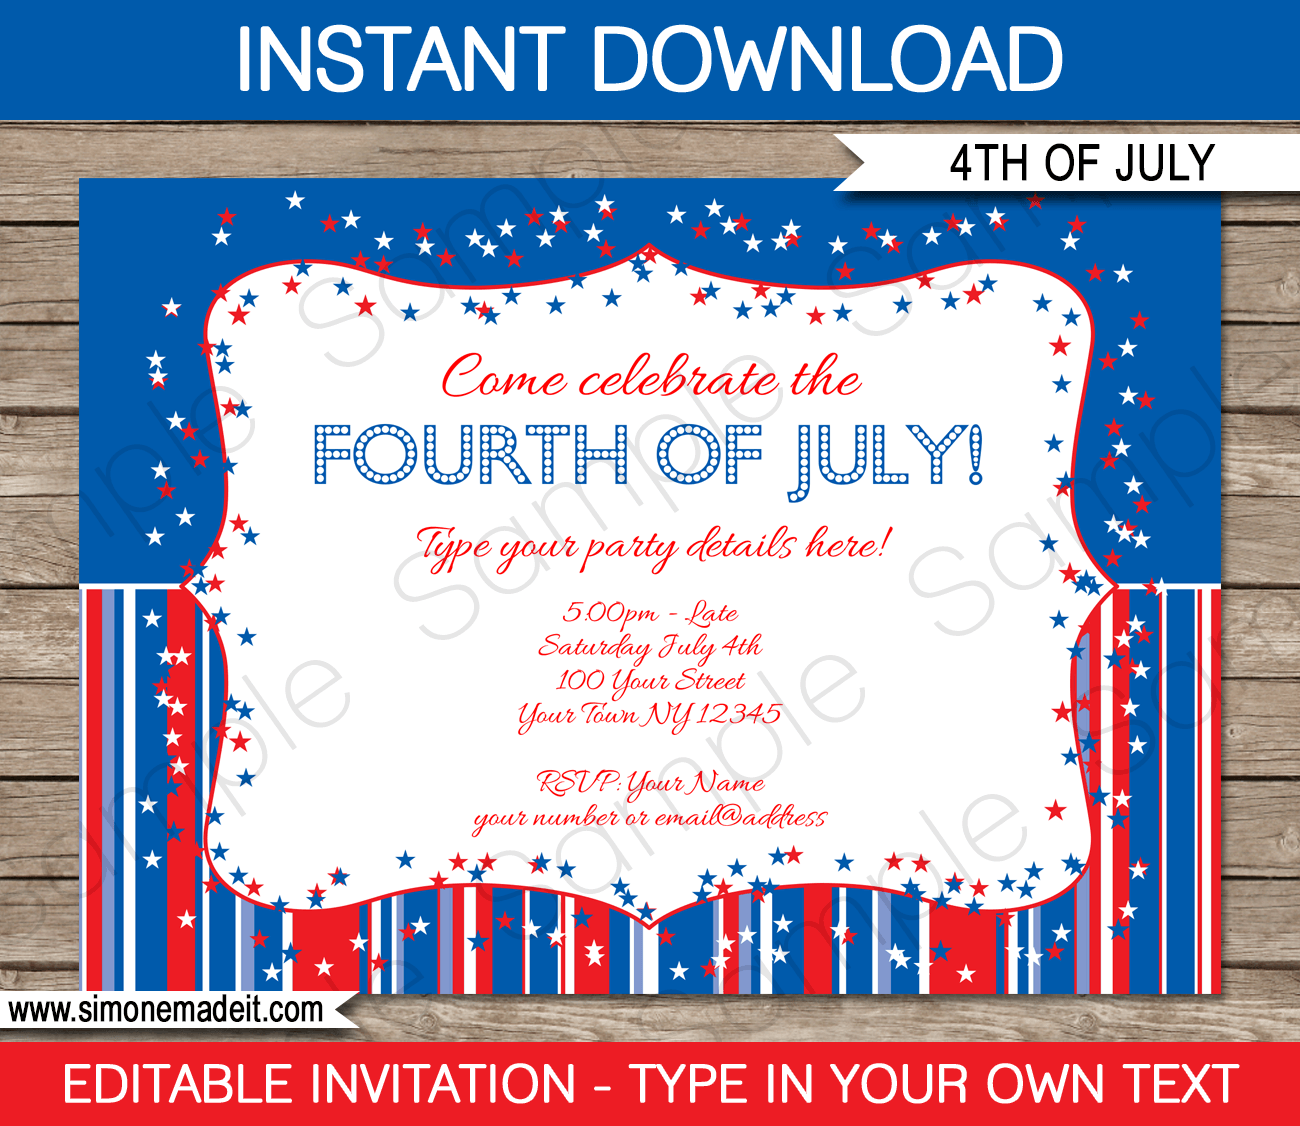 July 4th Party Invitations | Fourth of July | Editable DIY Theme Template | INSTANT DOWNLOAD $5.00 via SIMONEmadeit.com